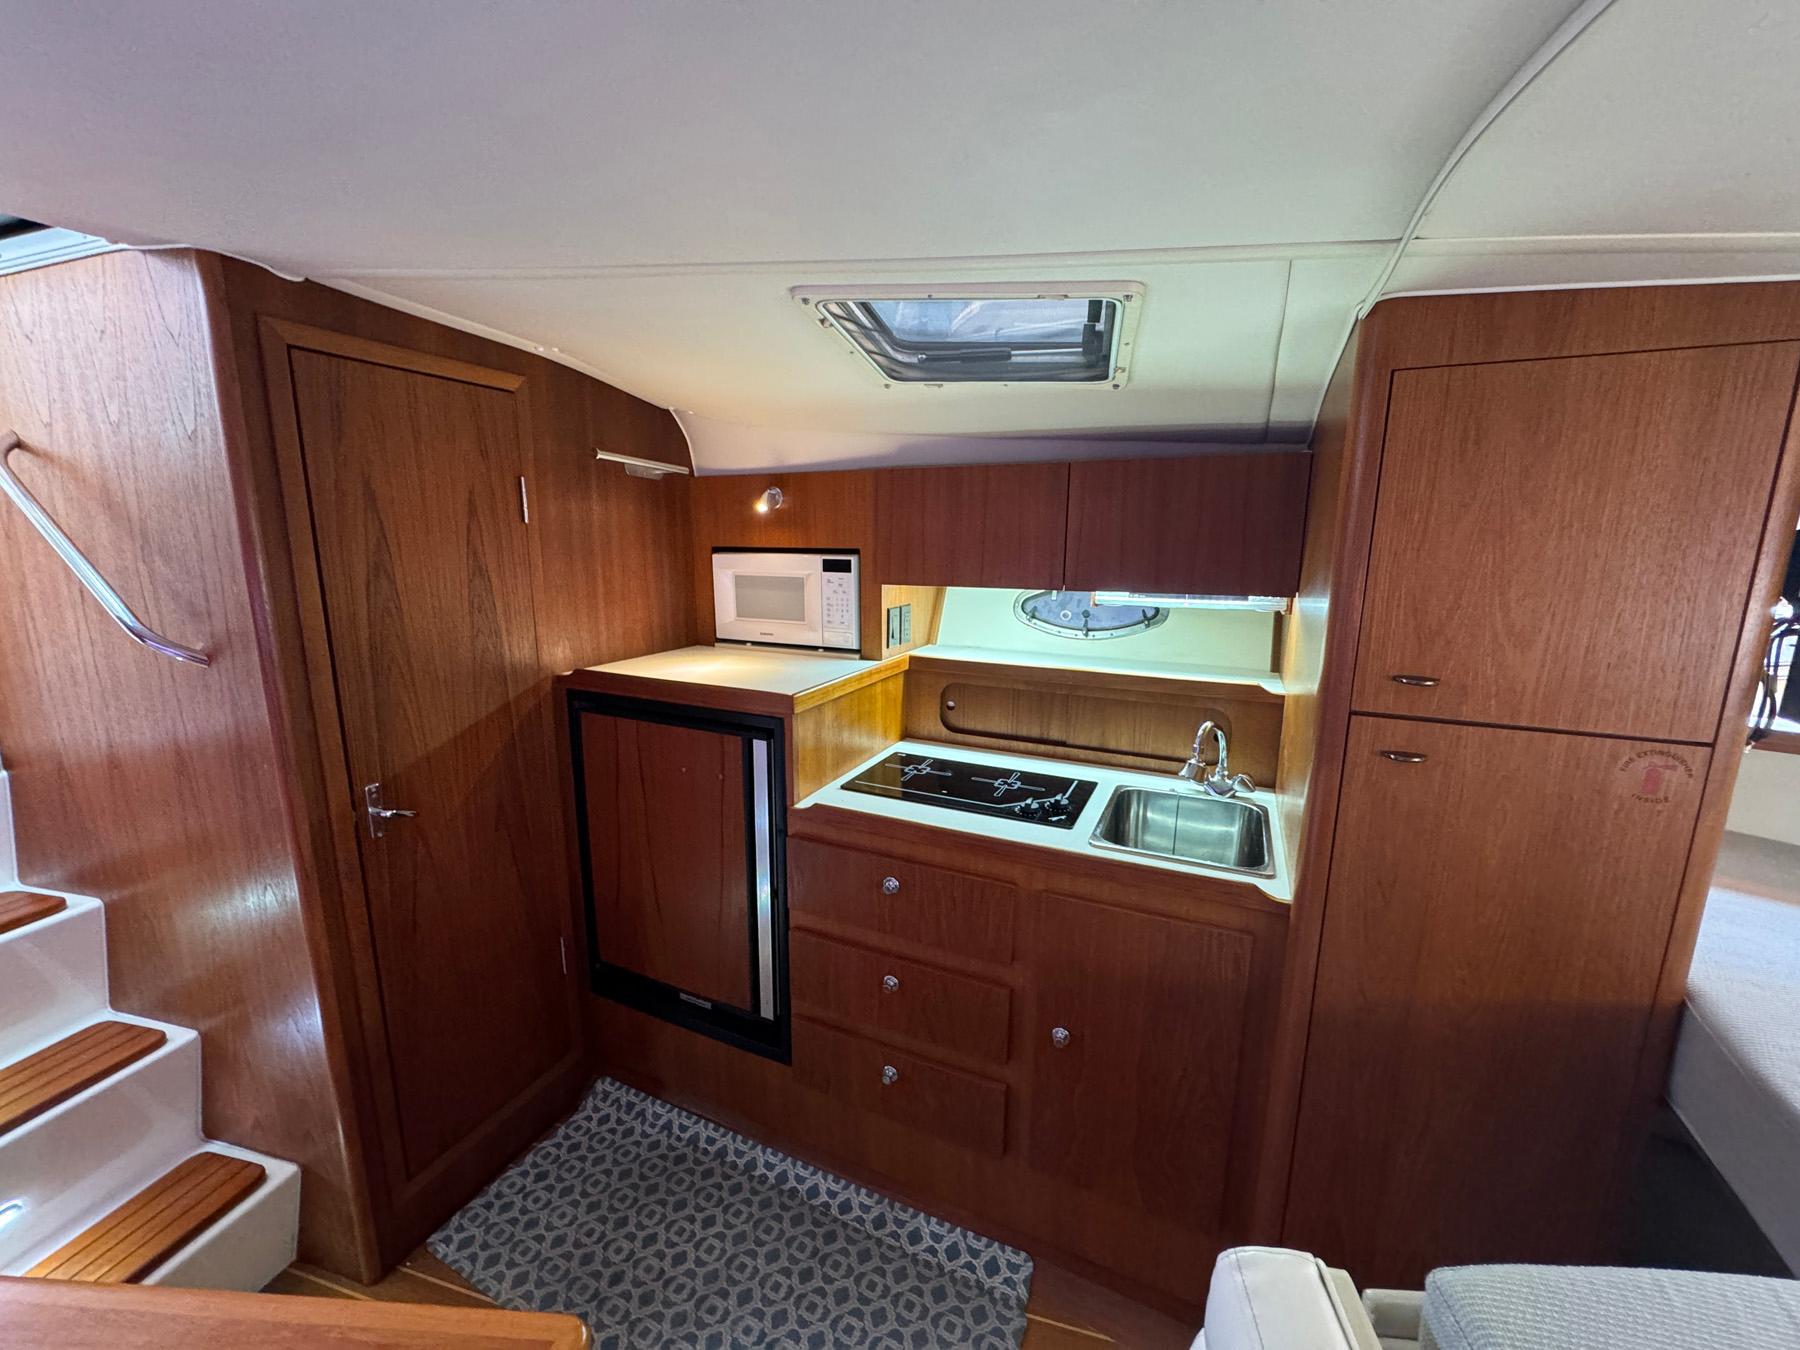 Galley with large refrigerator